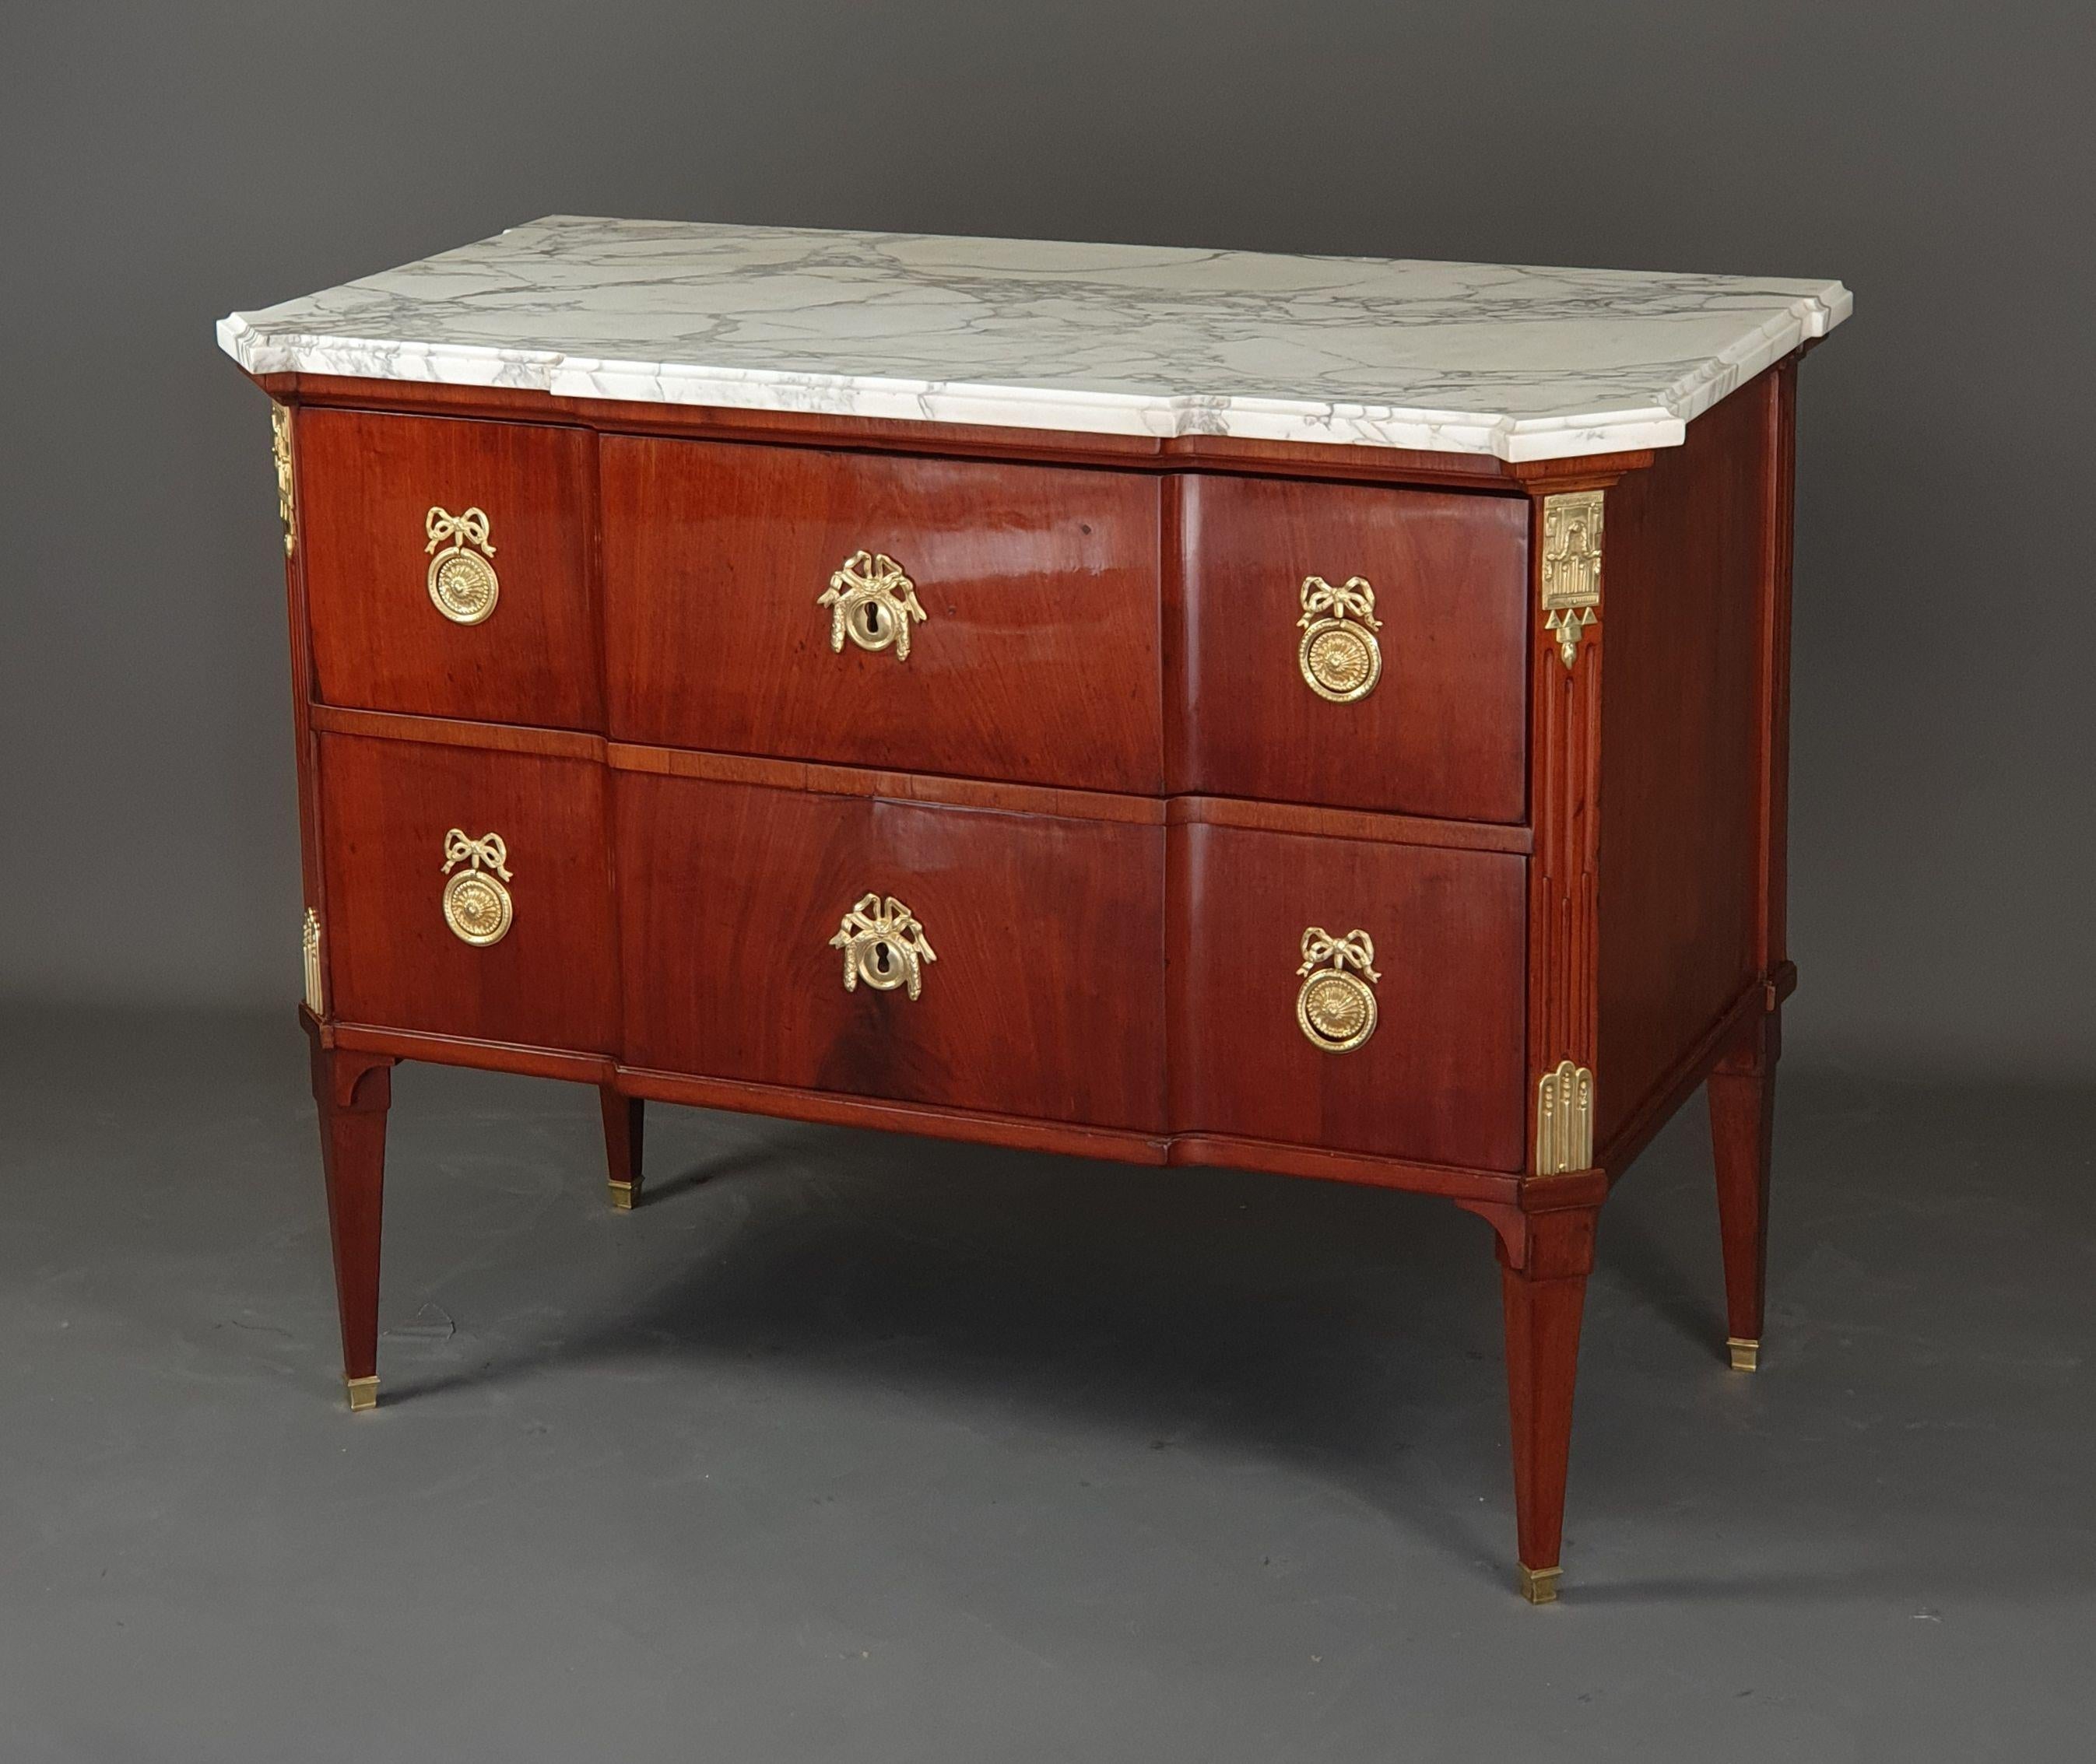 Elegant Commode from the Louis XVI period in blond mahogany veneer with beautiful ornamentation of gilded and chiseled bronze.

Central projection, front uprights with a cutaway adorned with rudent grooves, also projection on the rear uprights